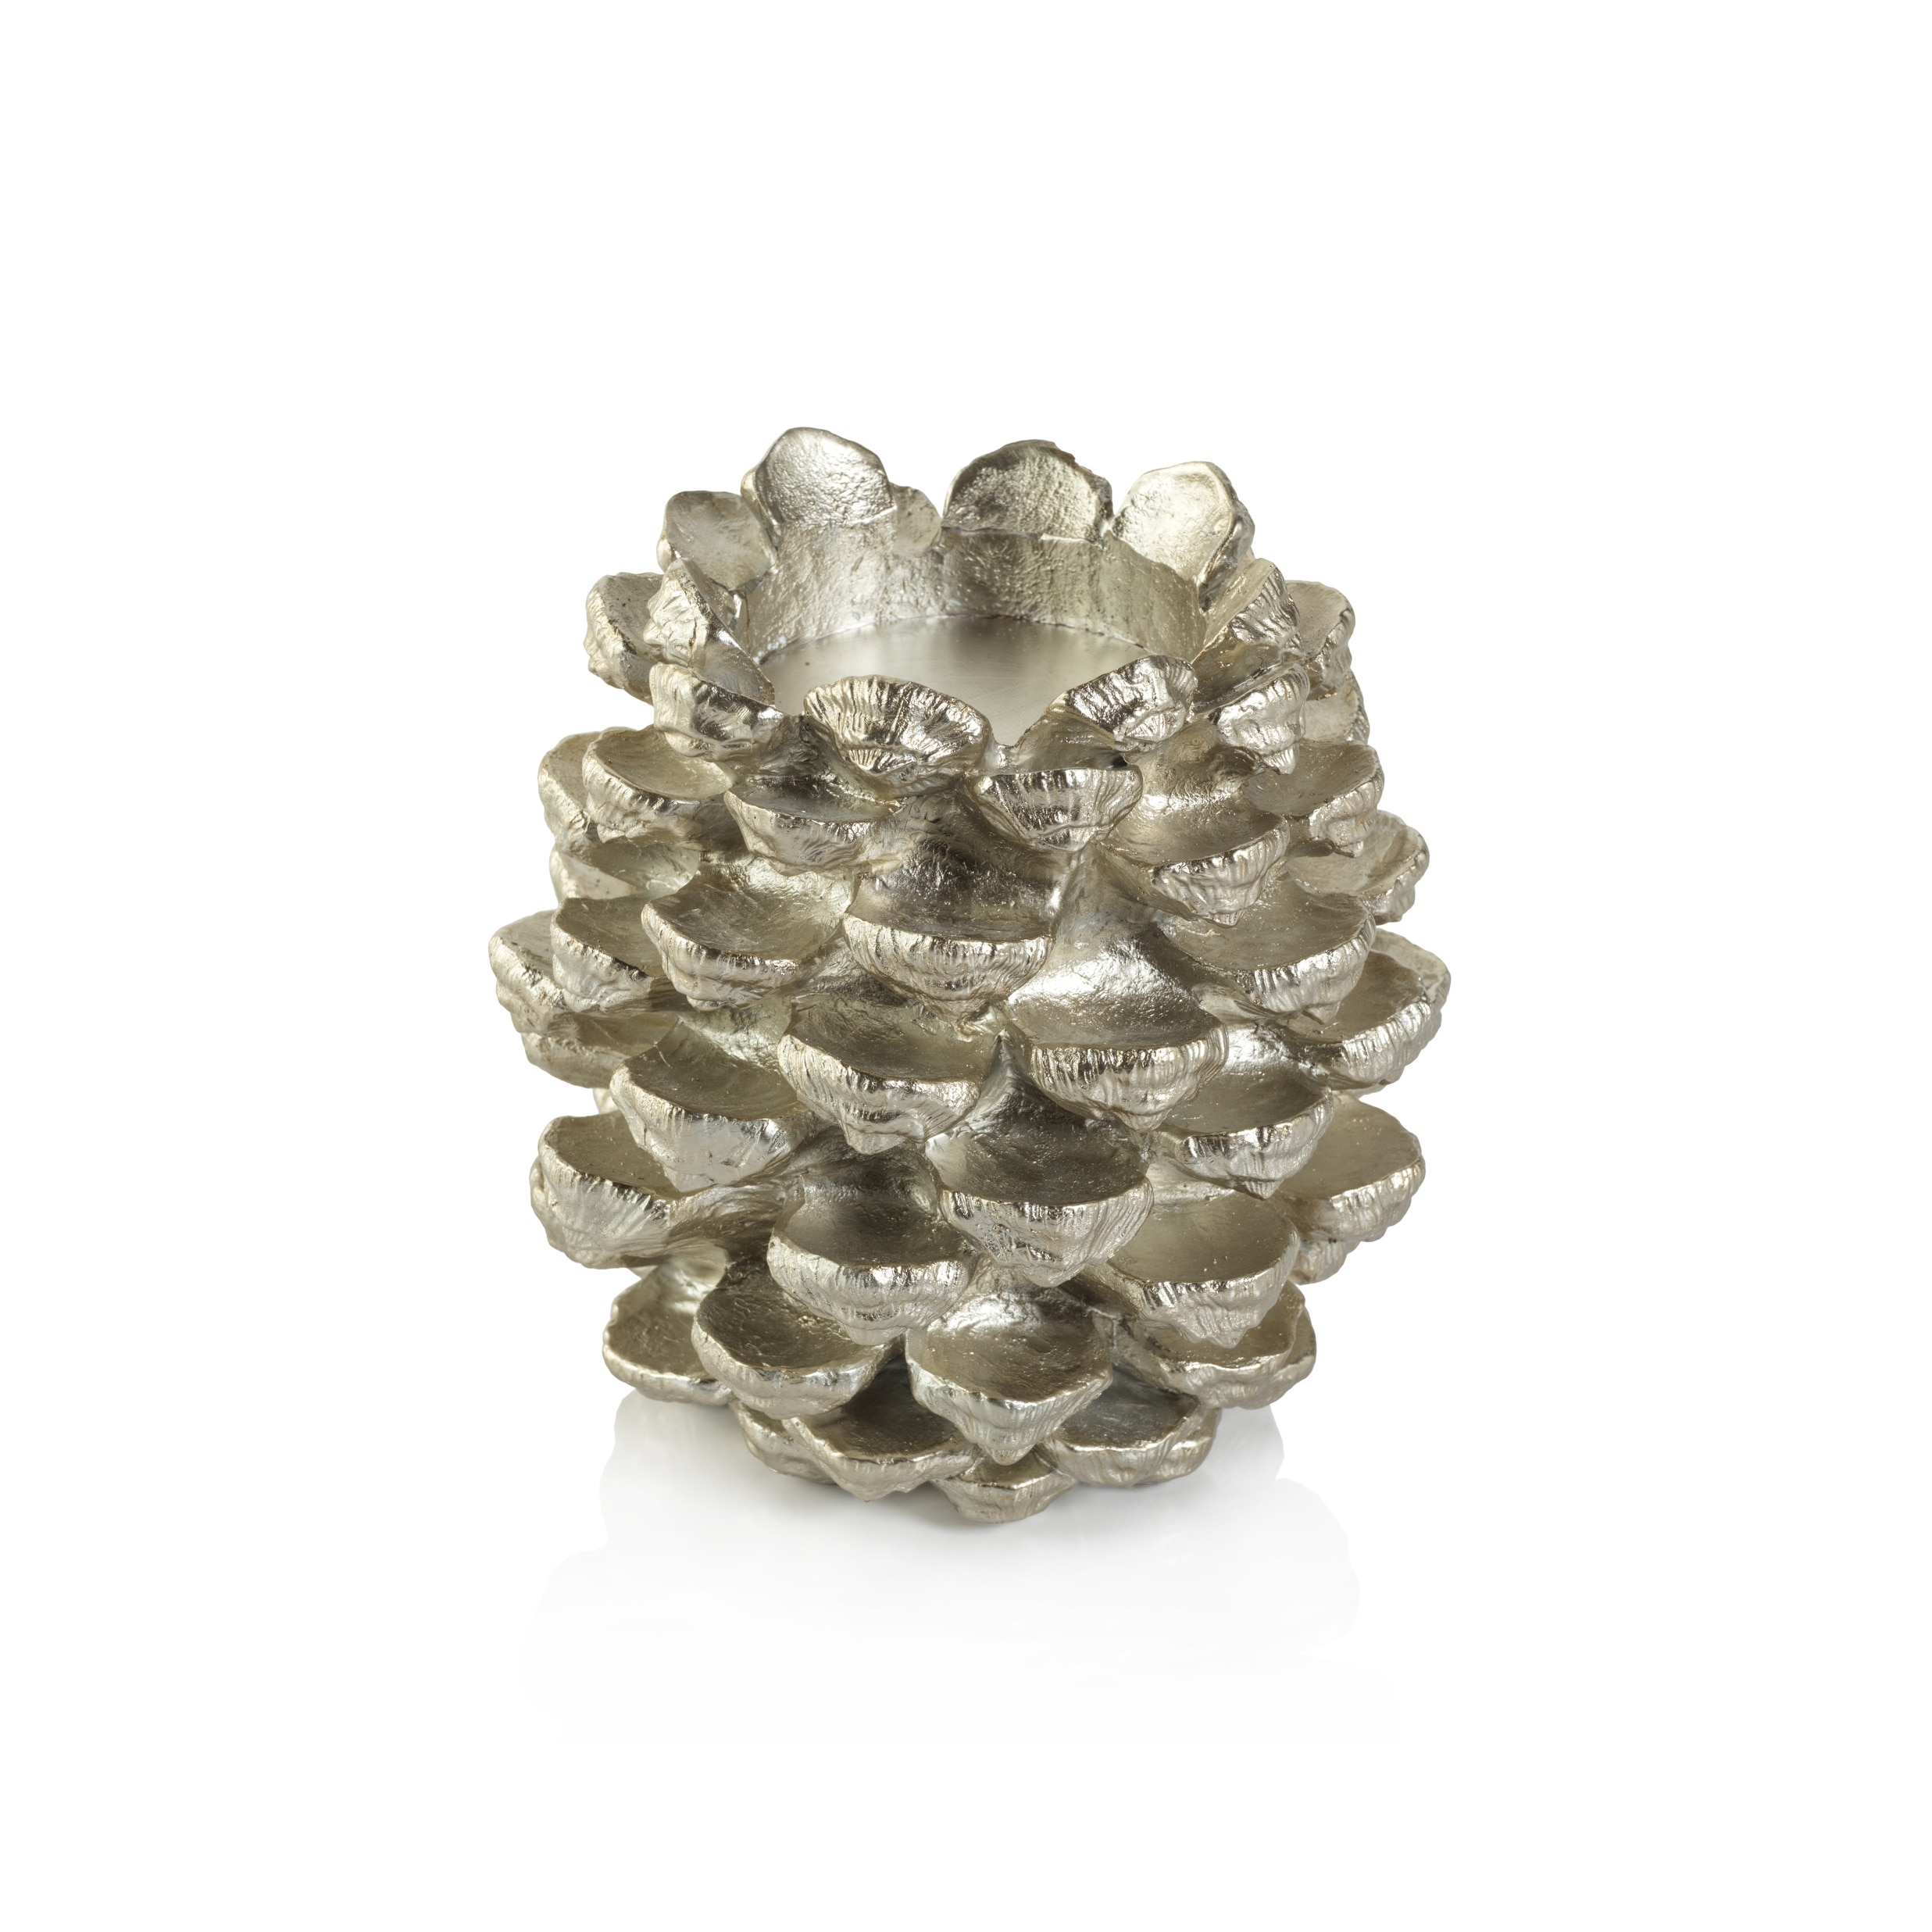 https://ak1.ostkcdn.com/images/products/is/images/direct/511b5fe6d0275f1812b00f434c55c04bacb20cf1/Neve-Silver-Pine-Cone-Pillar-Candle-Holder.jpg